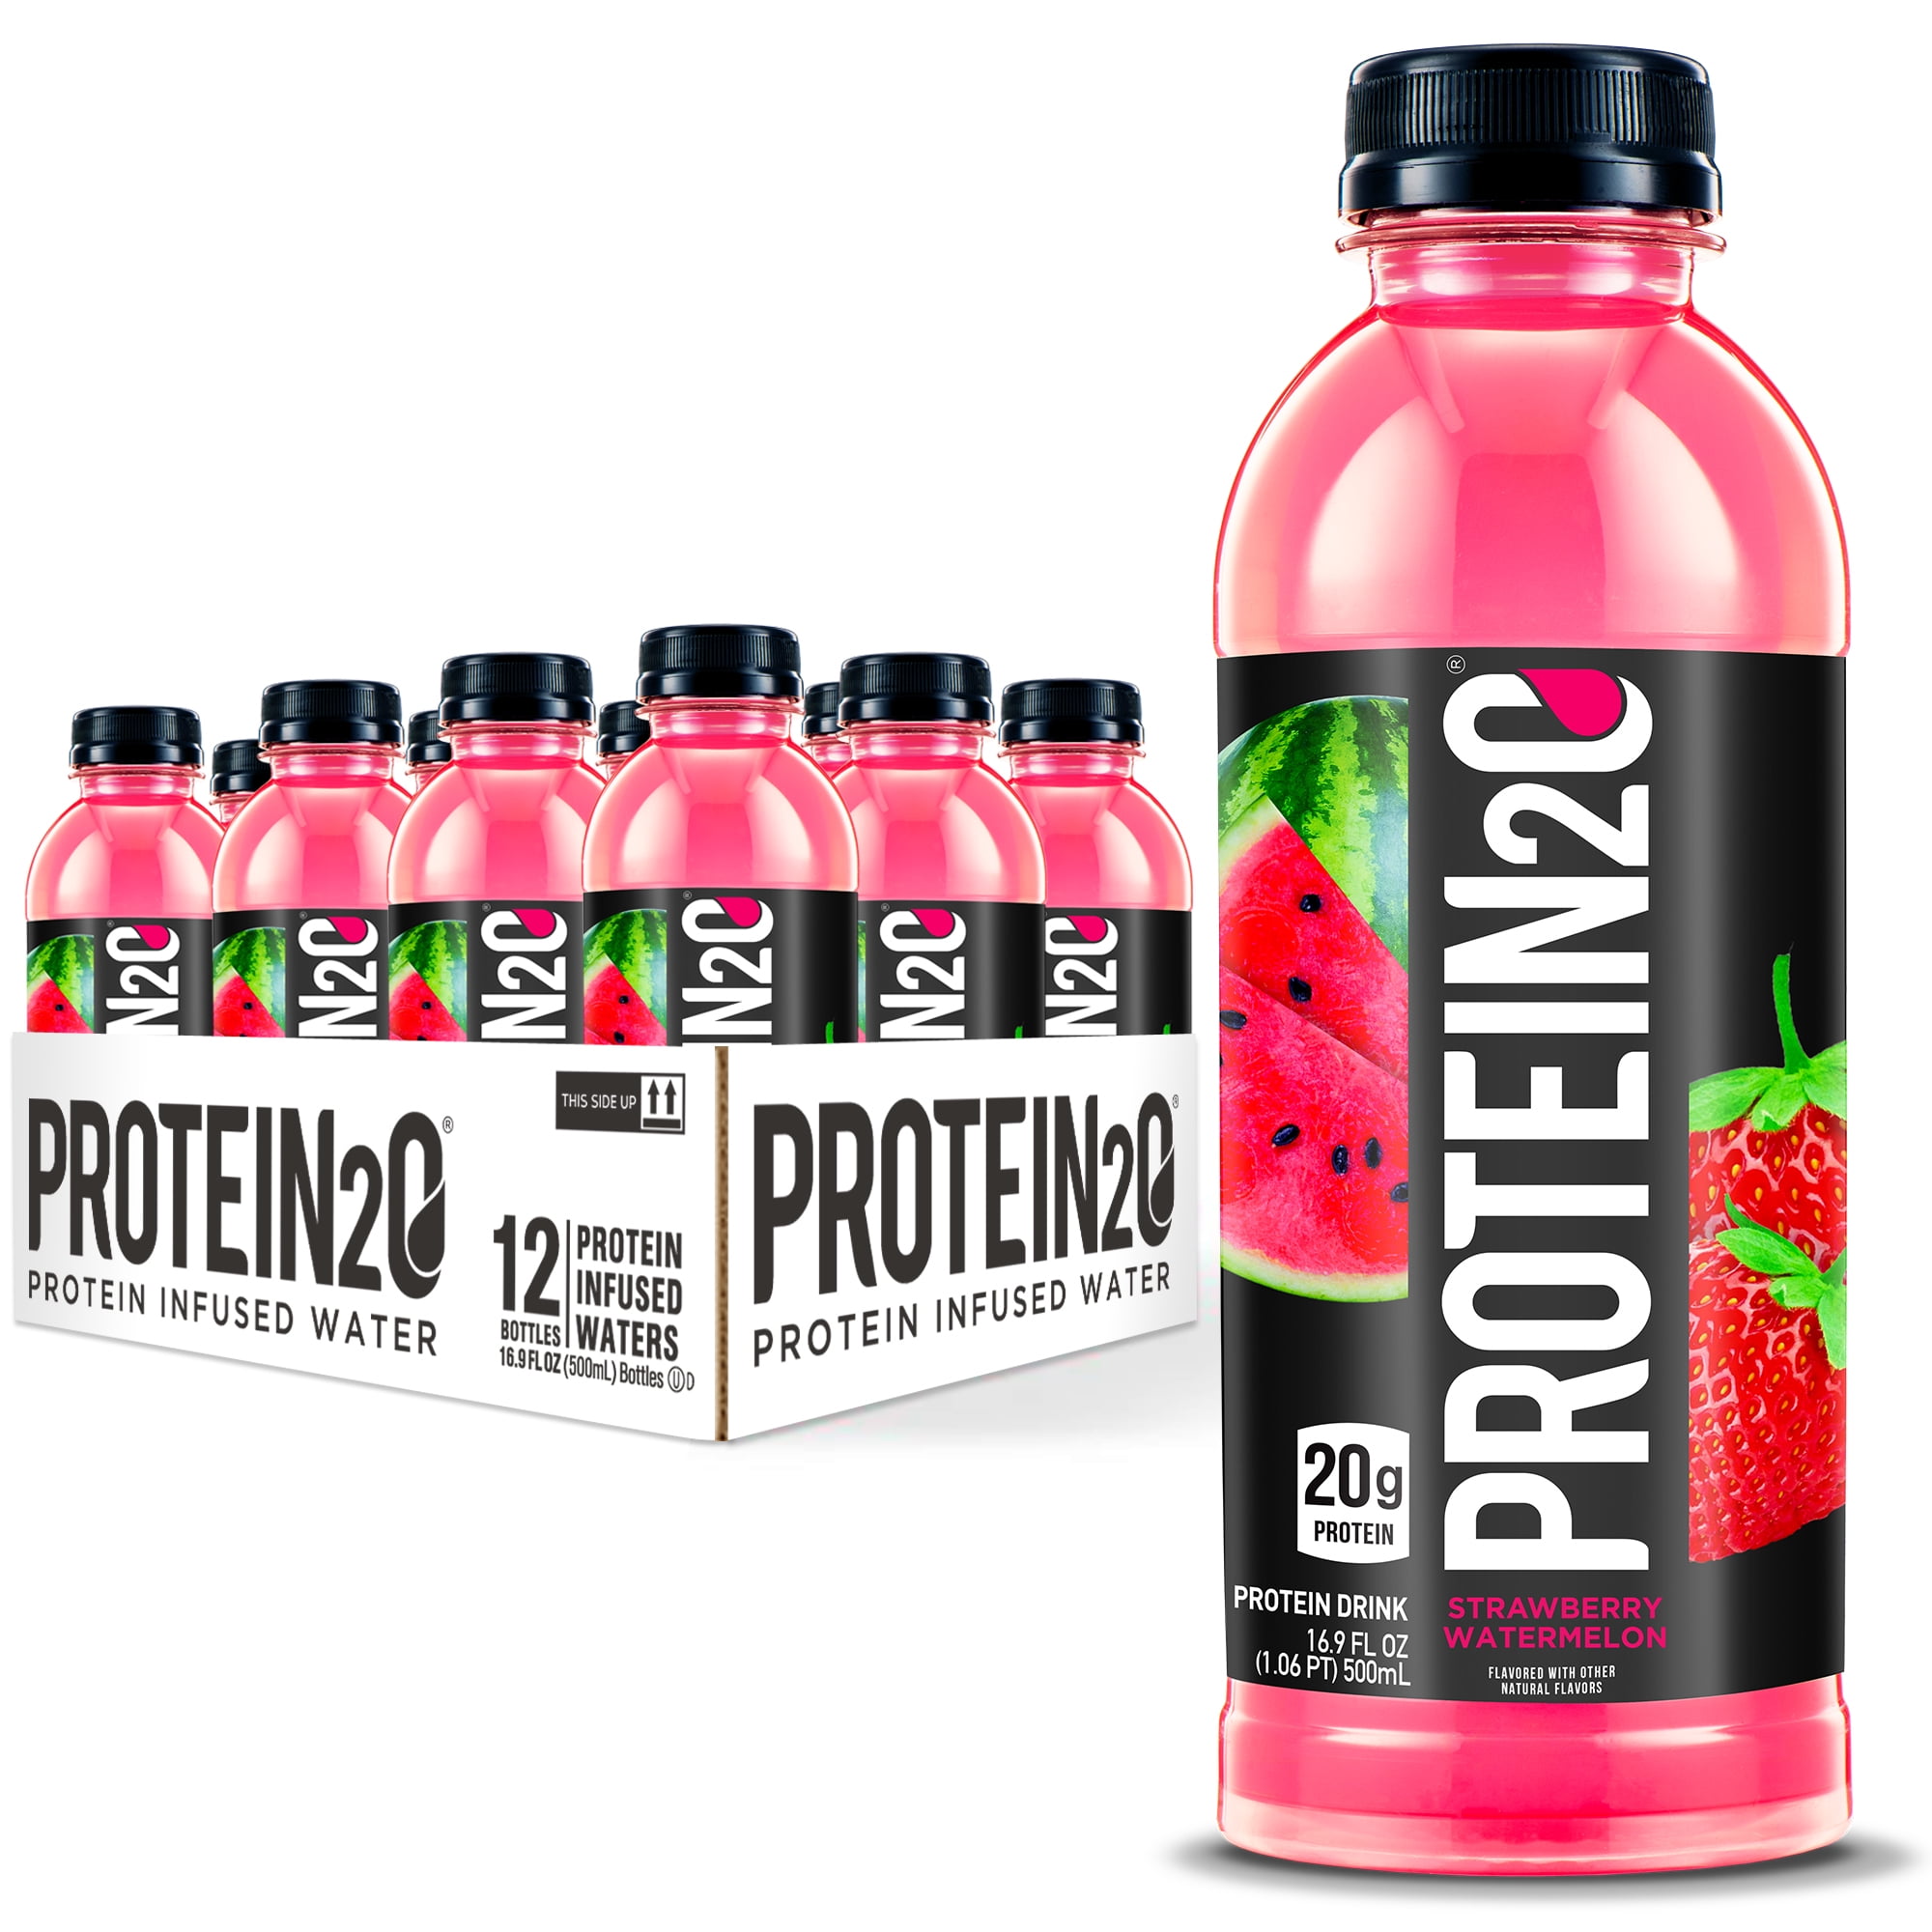 Protein2o Protein Water (@protein2o) • Instagram photos and videos